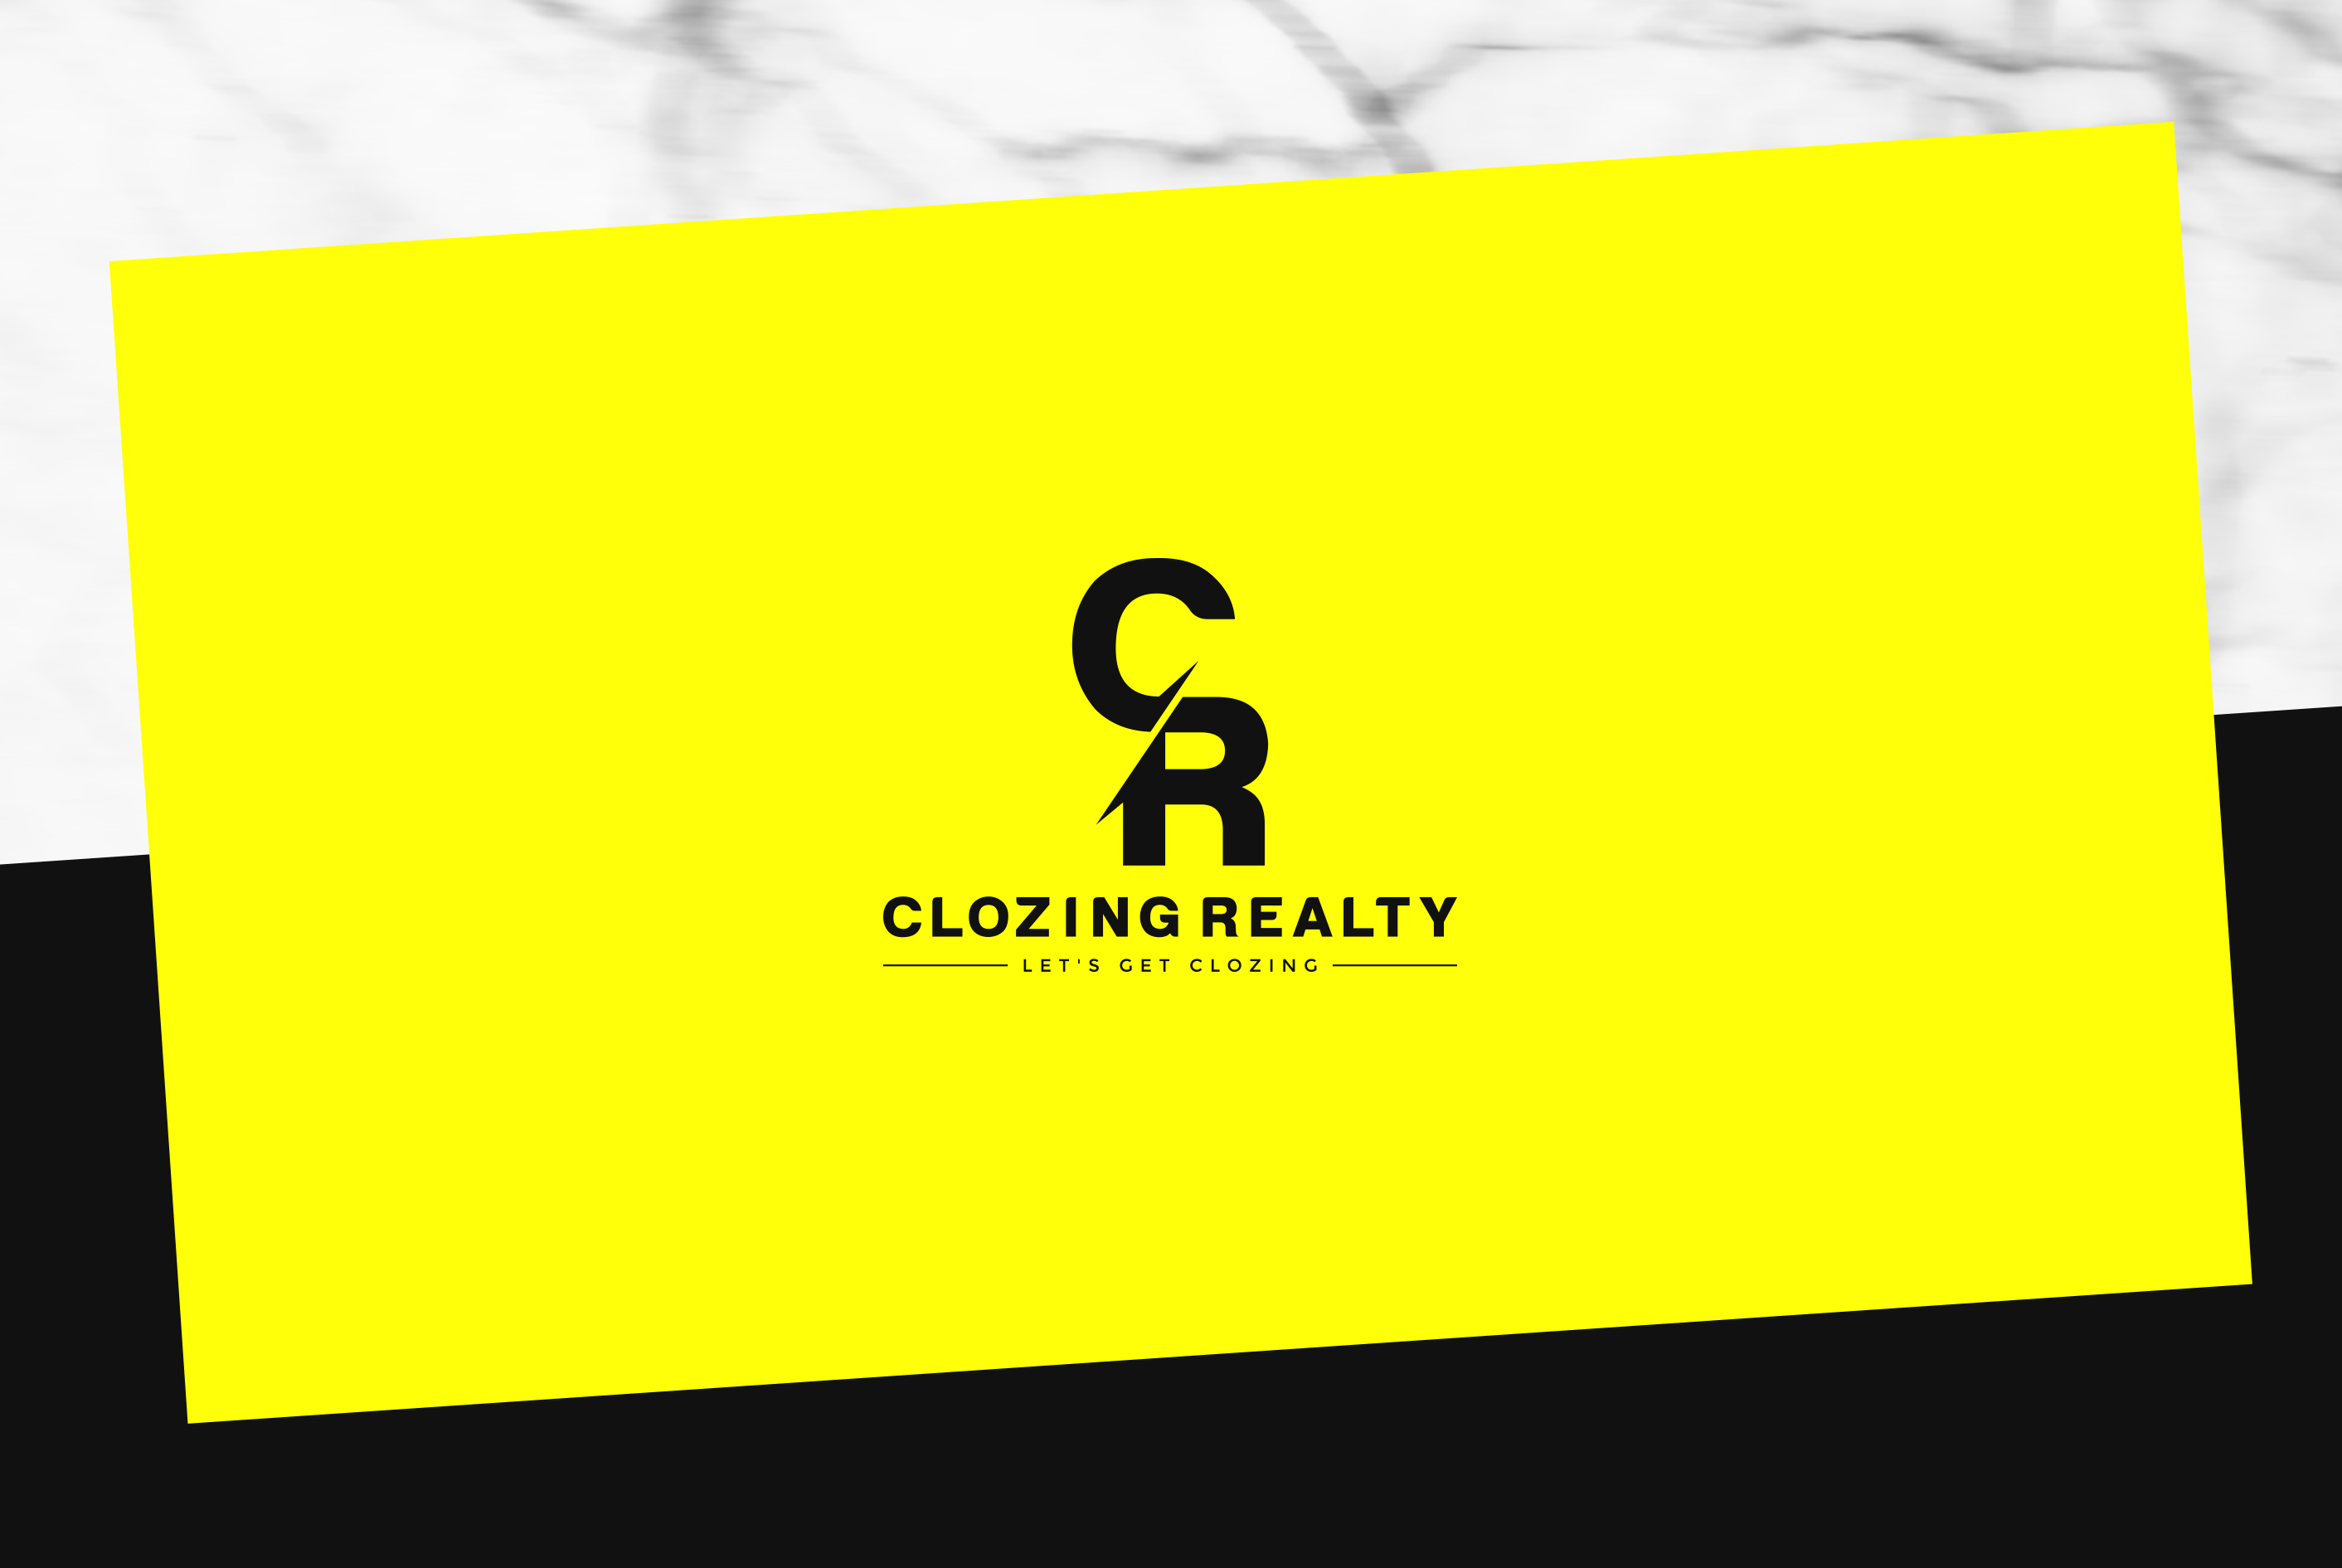 Clozing Realty Group Design #6